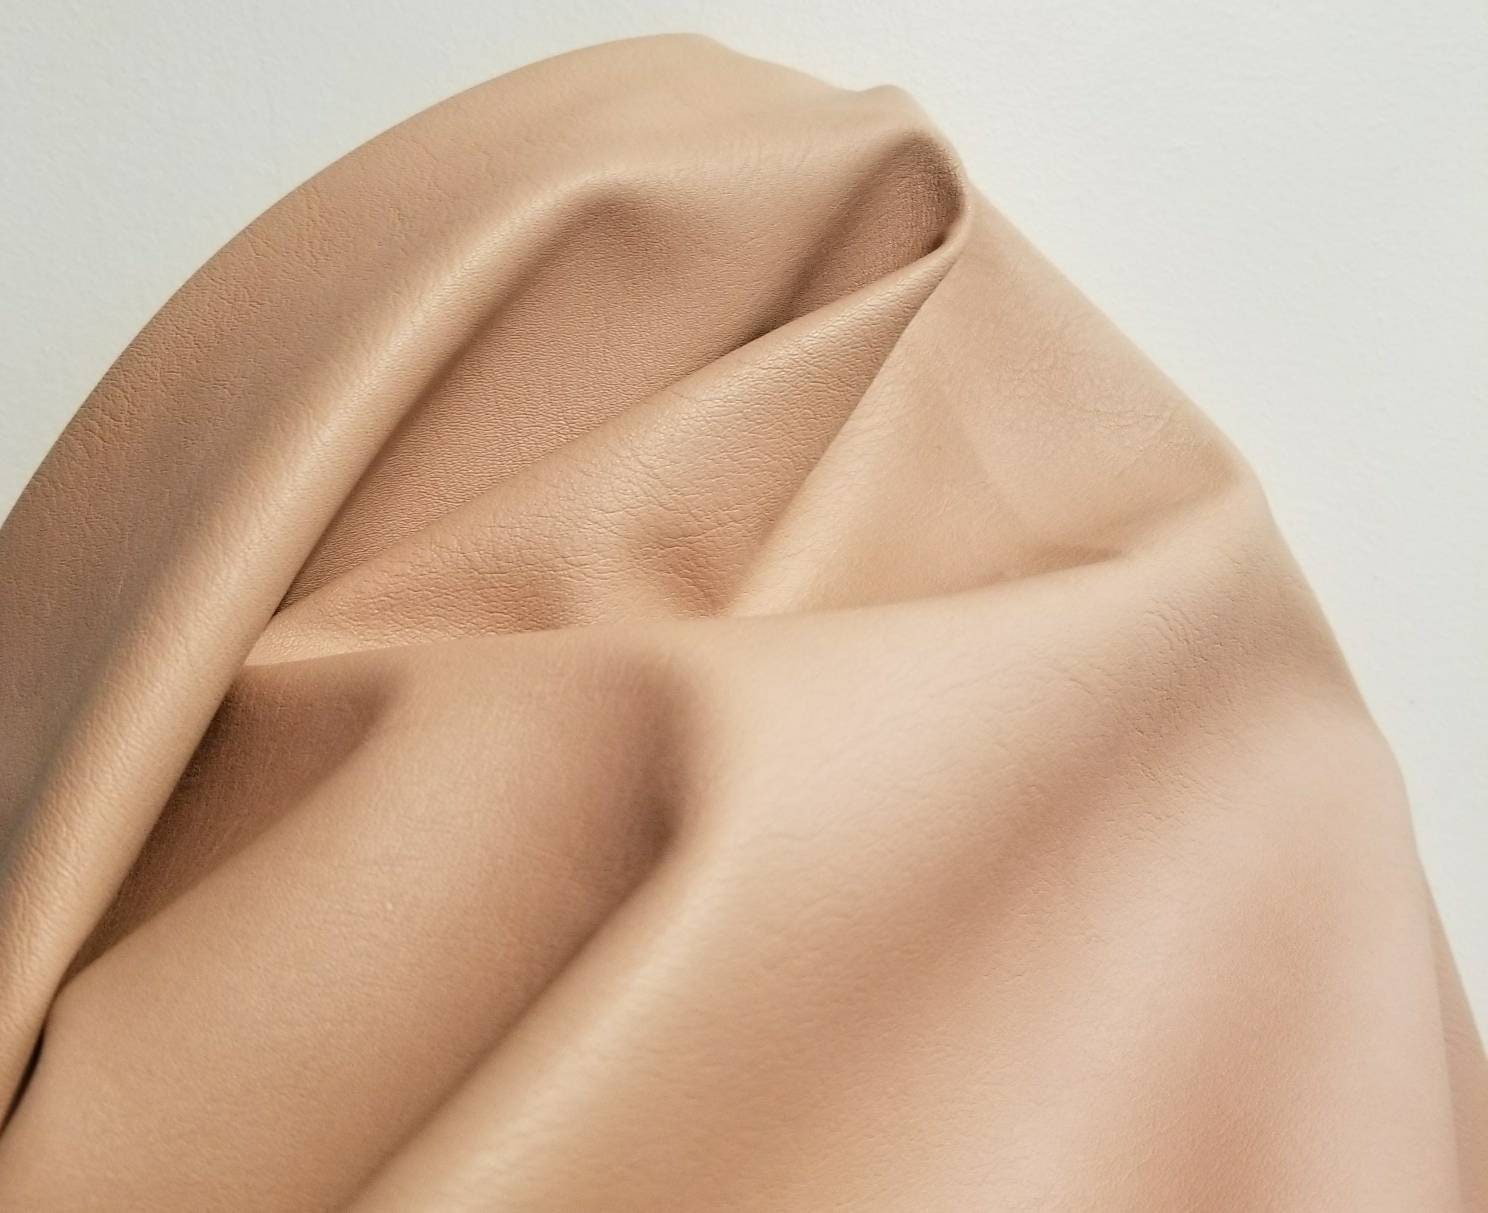 NAT Leathers | British Tan Two Tone Soft Faux Vegan Leather PU (Peta  Approved Vegan) | 1 Yard (36 inch x 54 inch Wide) Cut by Yard | Synthetic